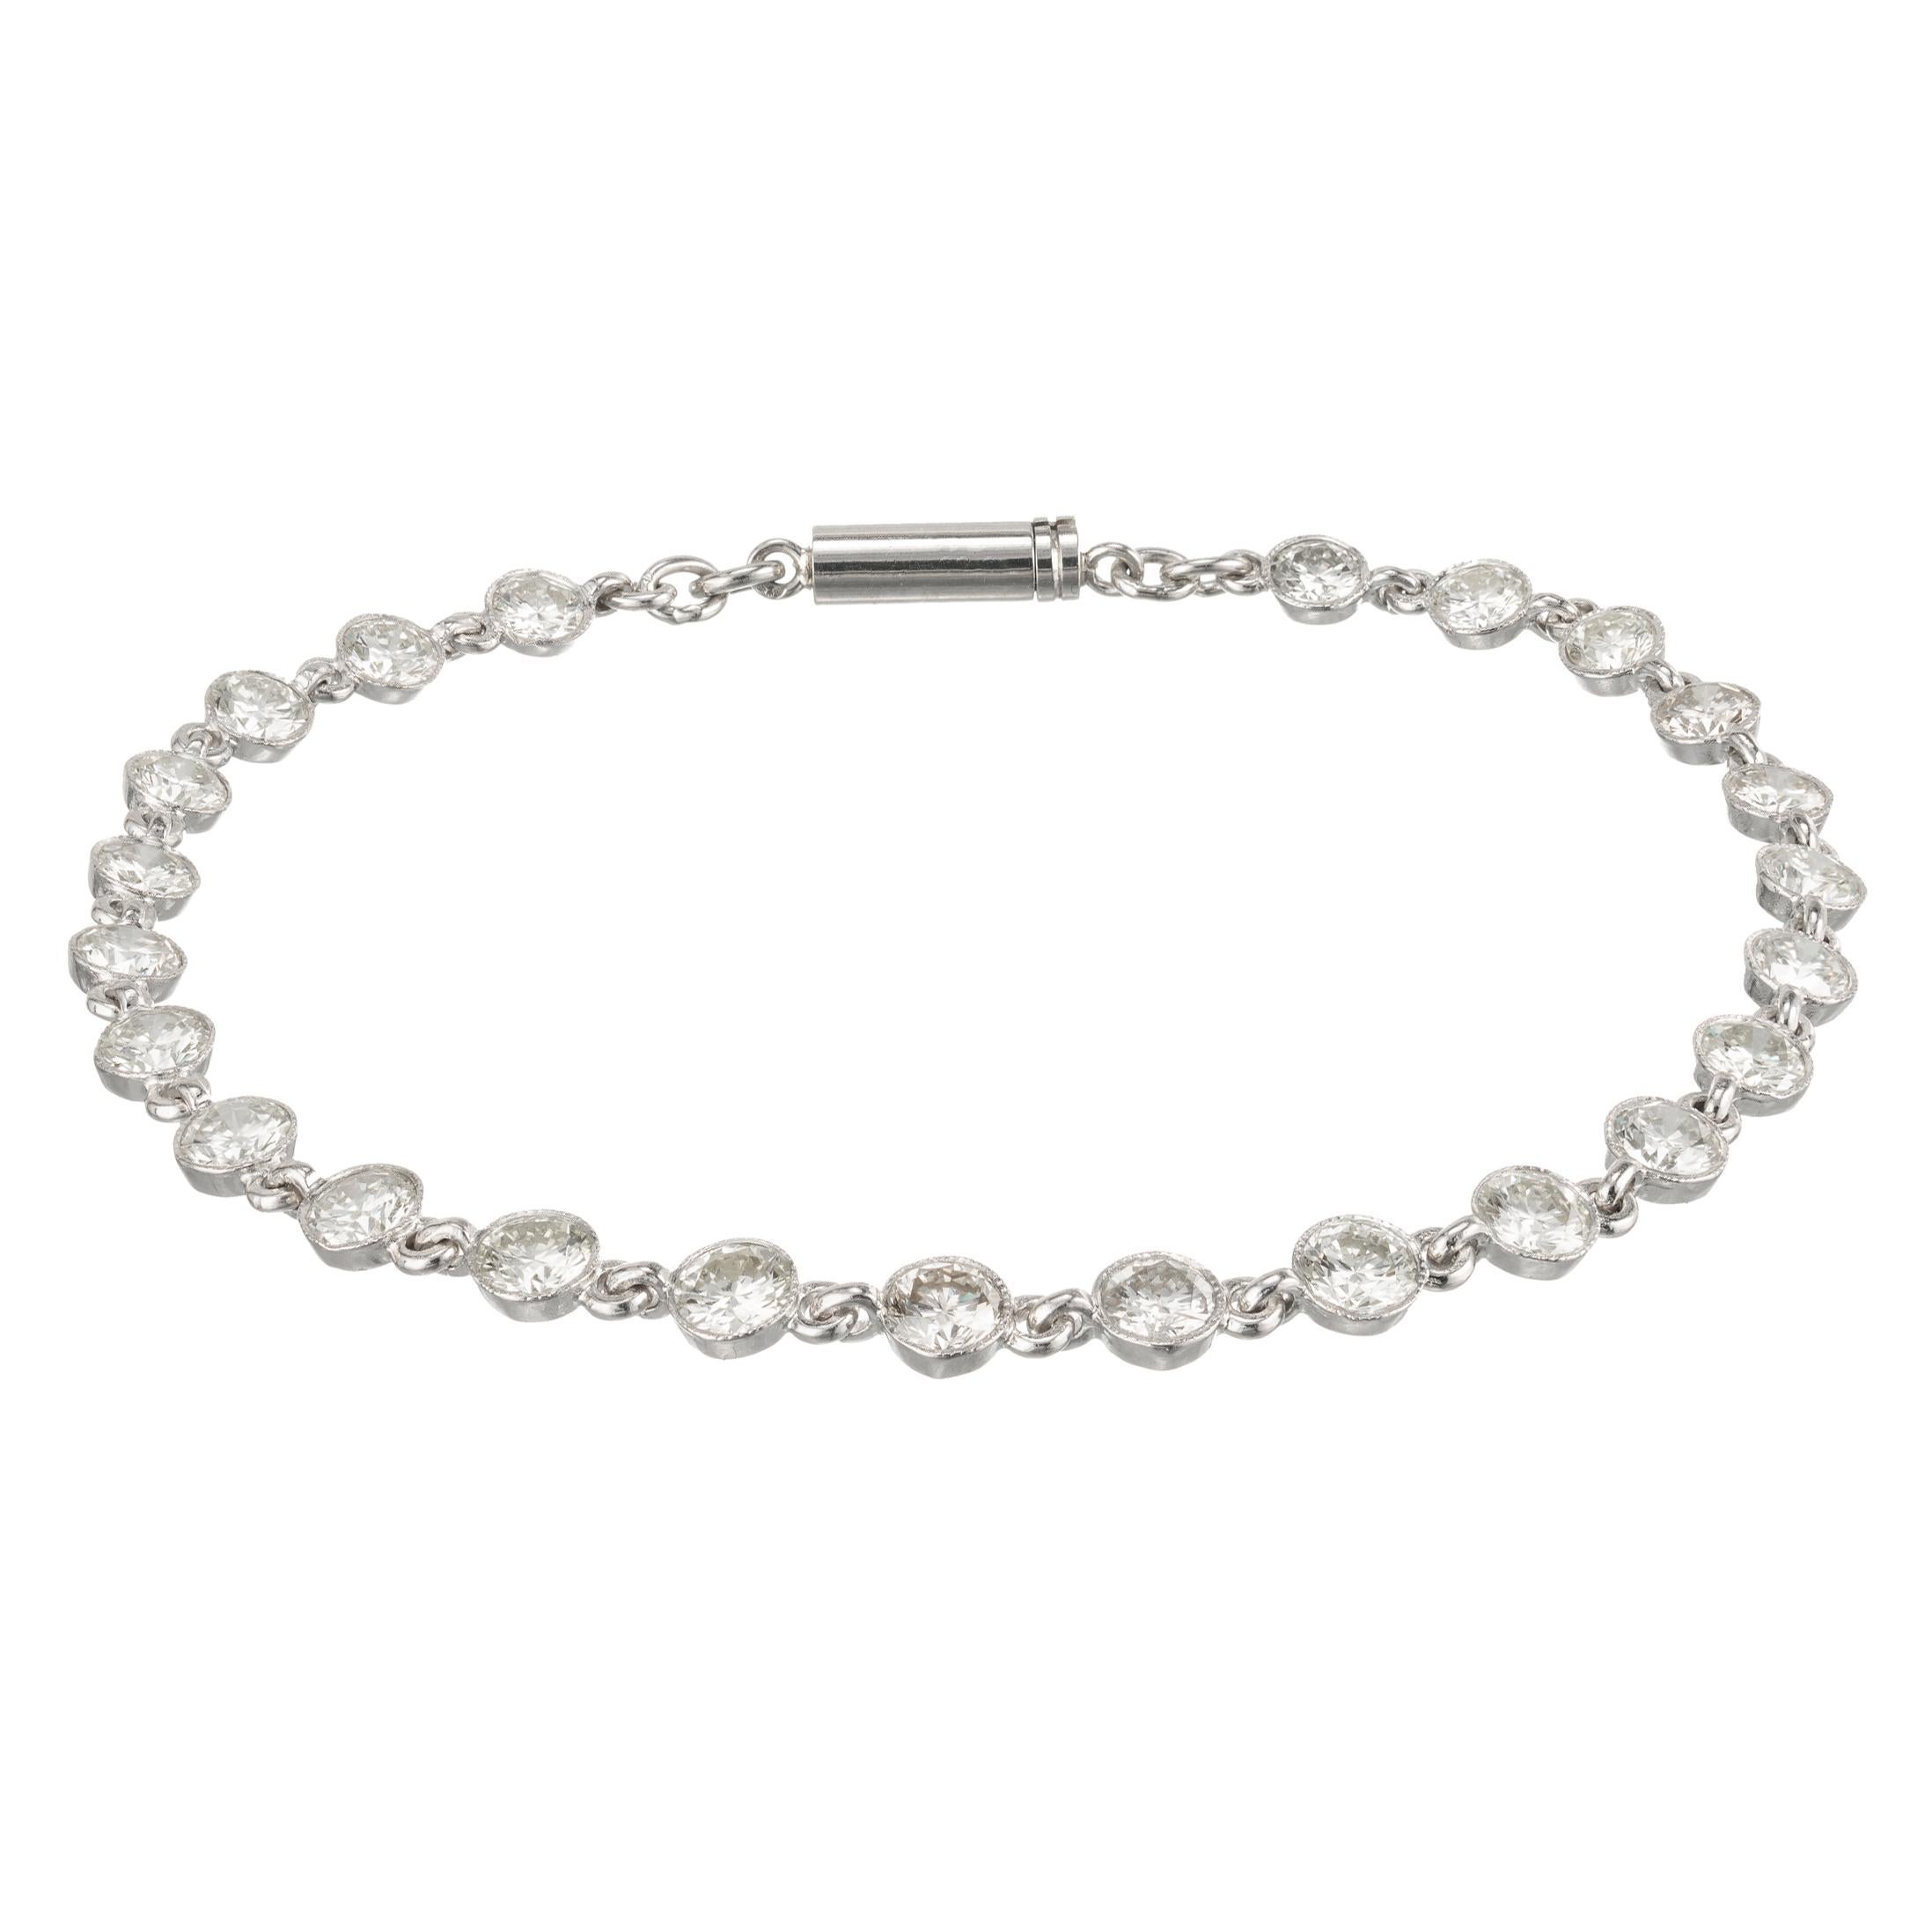 24 round diamond handmade solid Platinum tube set bracelet with Platinum connecting rings. 

24 full cut diamonds, approx. total weight 5.40cts, H to I, VS1 - SI1
Length: 8 inches
Platinum
Stamped: Plat
9.2 grams
Width: 4.5mm
Depth: 2.5mm